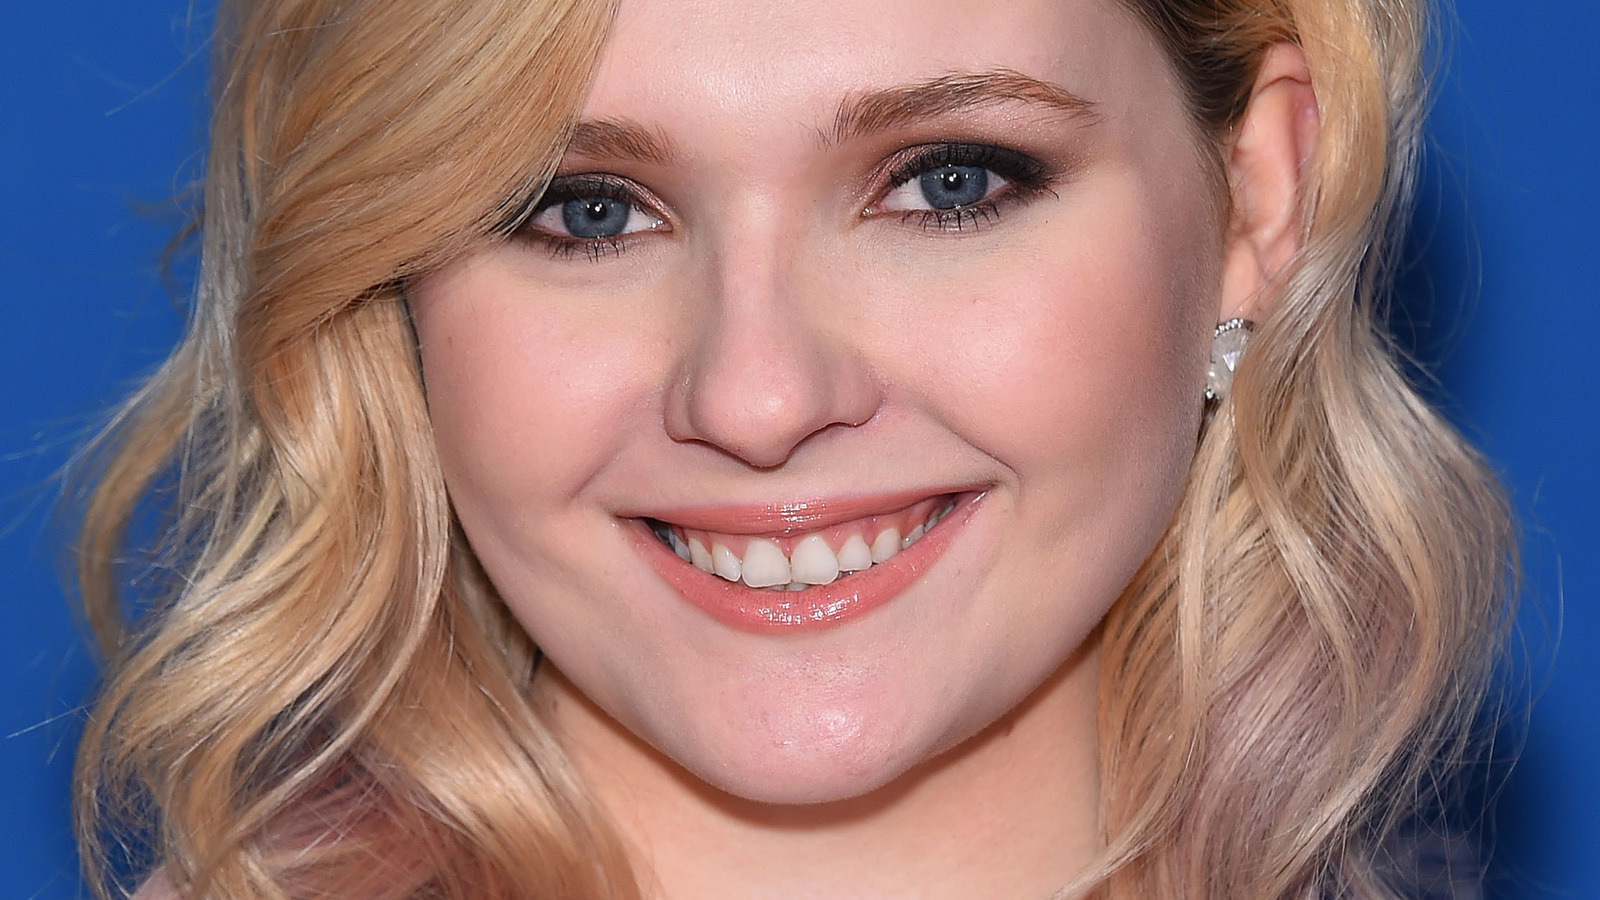 Diamond Expert Details Classic Beauty Of Abigail Breslin’s Wedding Ring Set – Exclusive